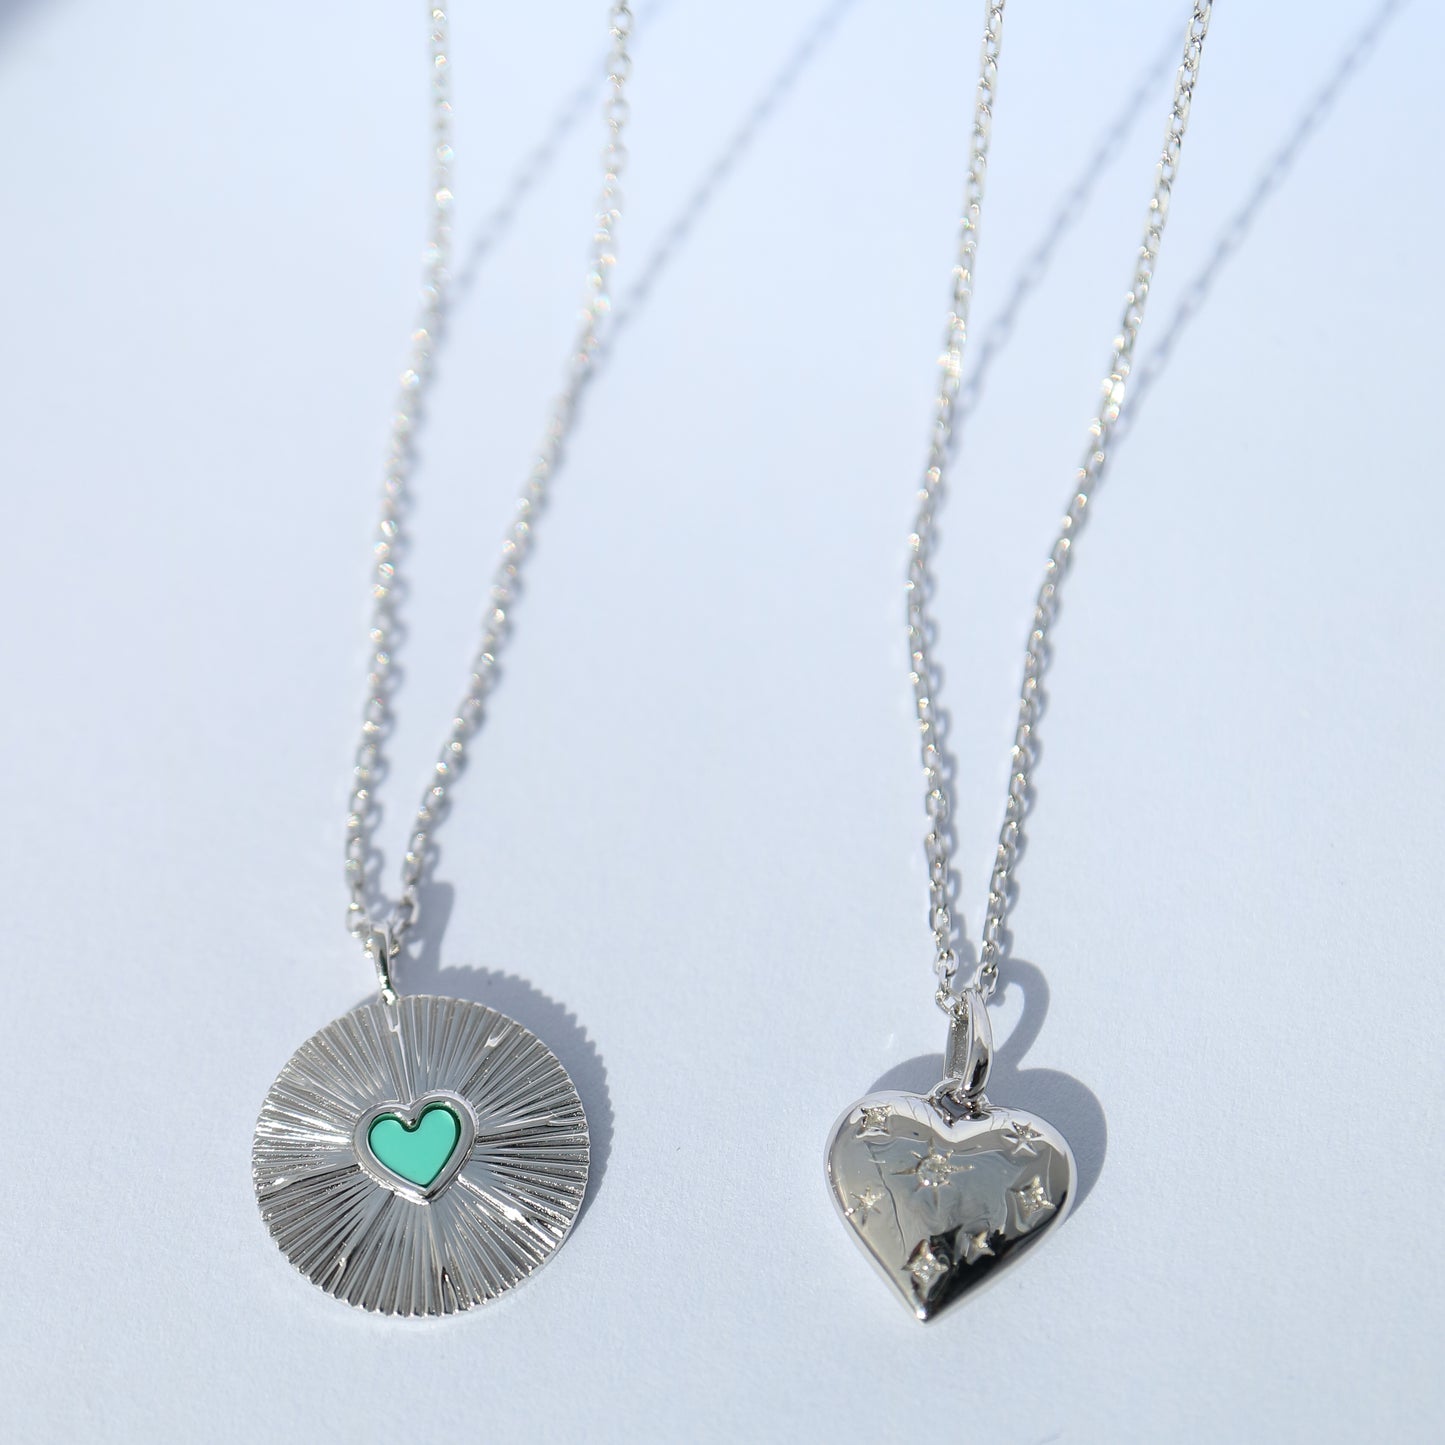 Heart Medallion Necklaces in silver